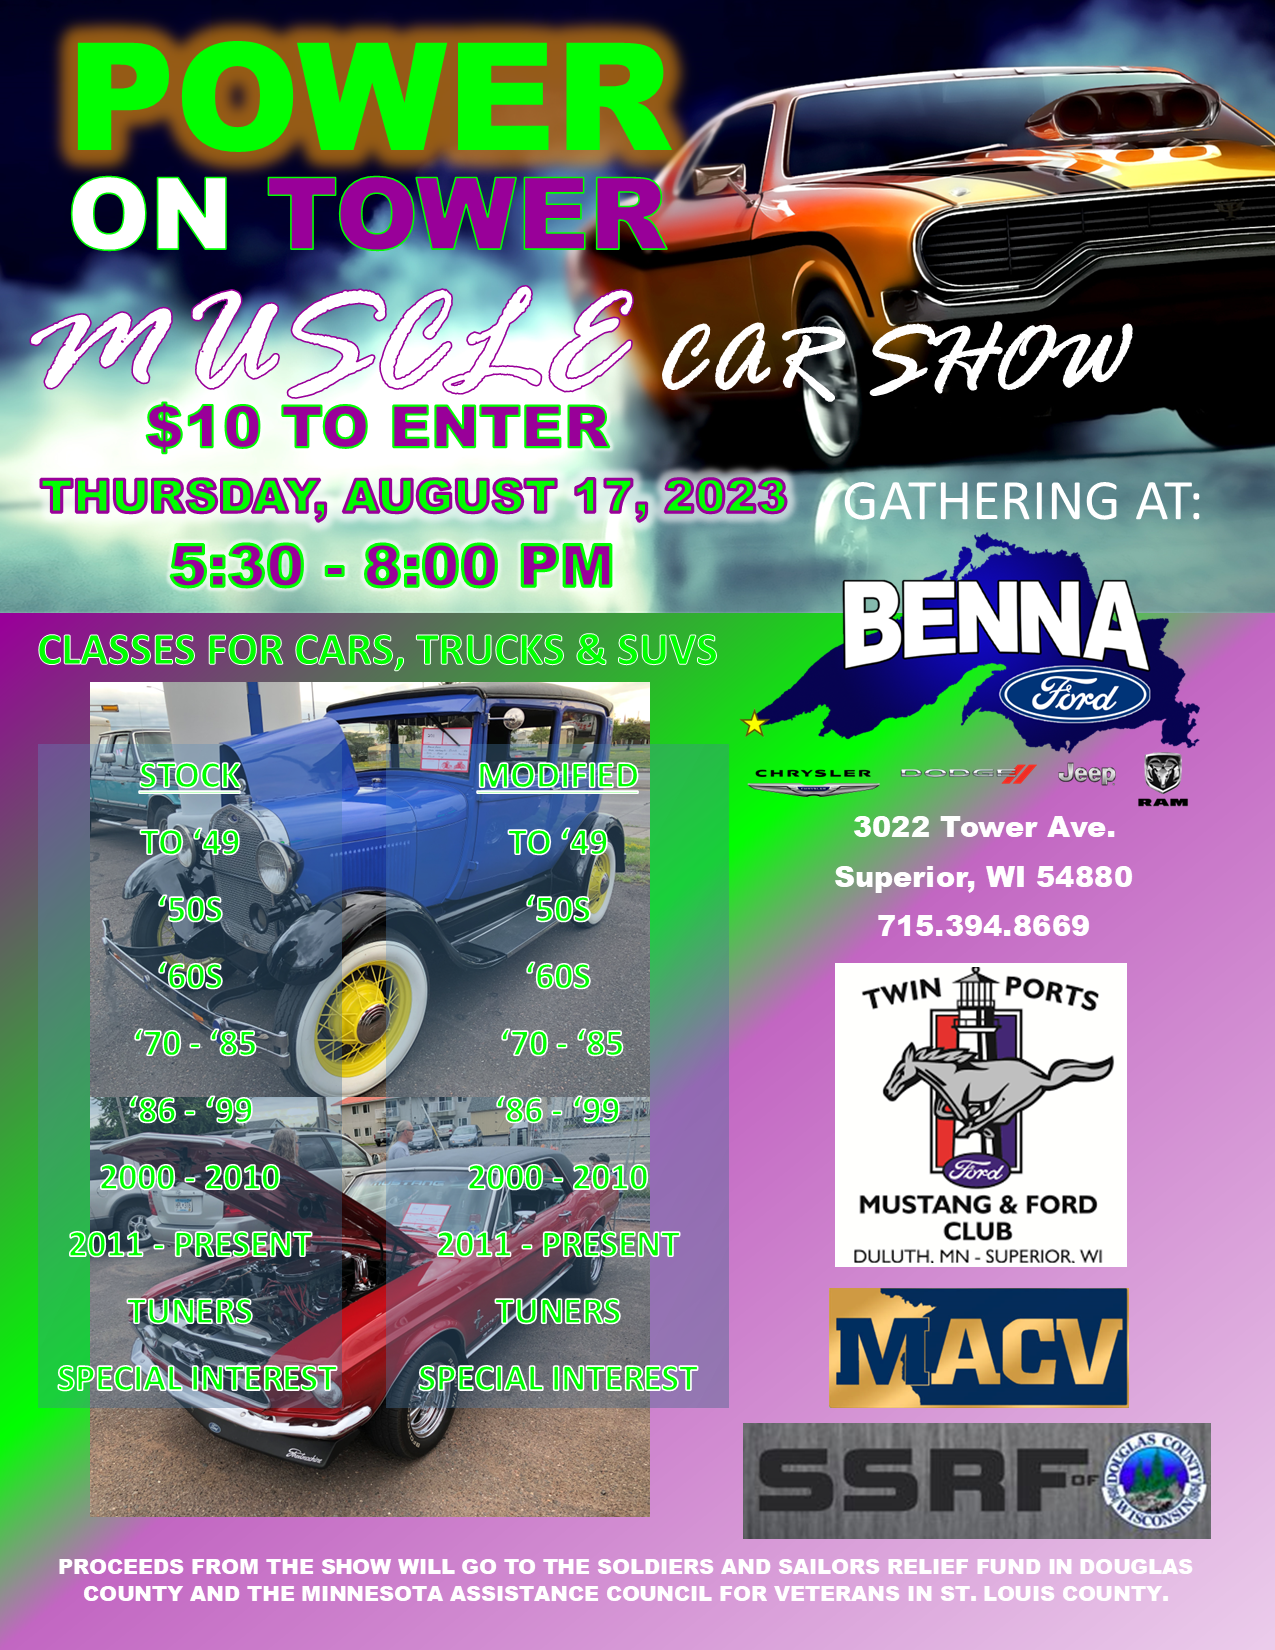 Benna Ford Power On Tower Muscle Car Show 2022